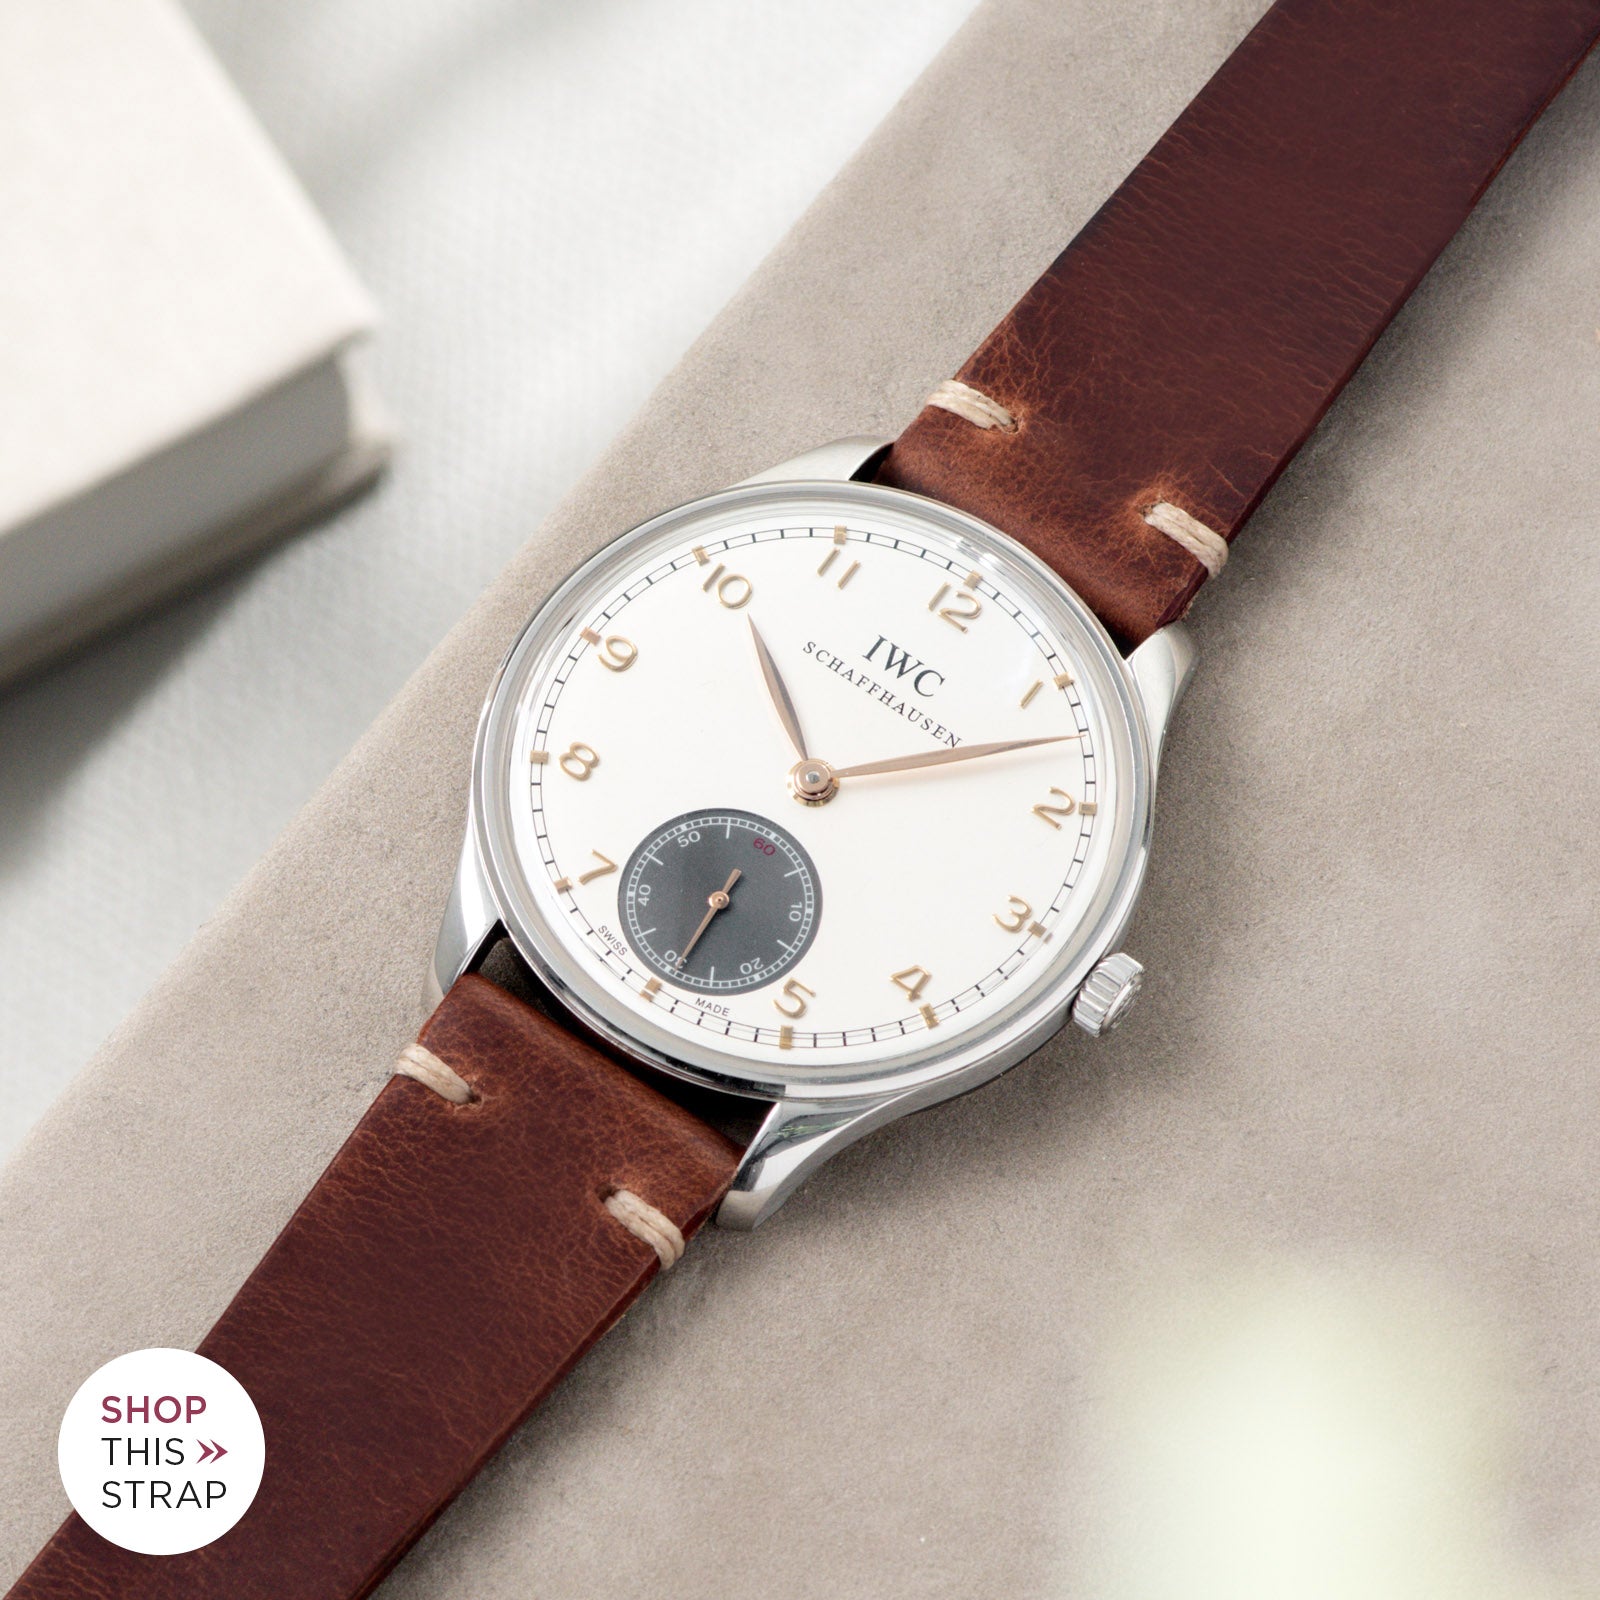 Bulang and Sons_Strap Guide_IWC Portuguese Ref IW545405_Siena Brown Leather Watch Strap